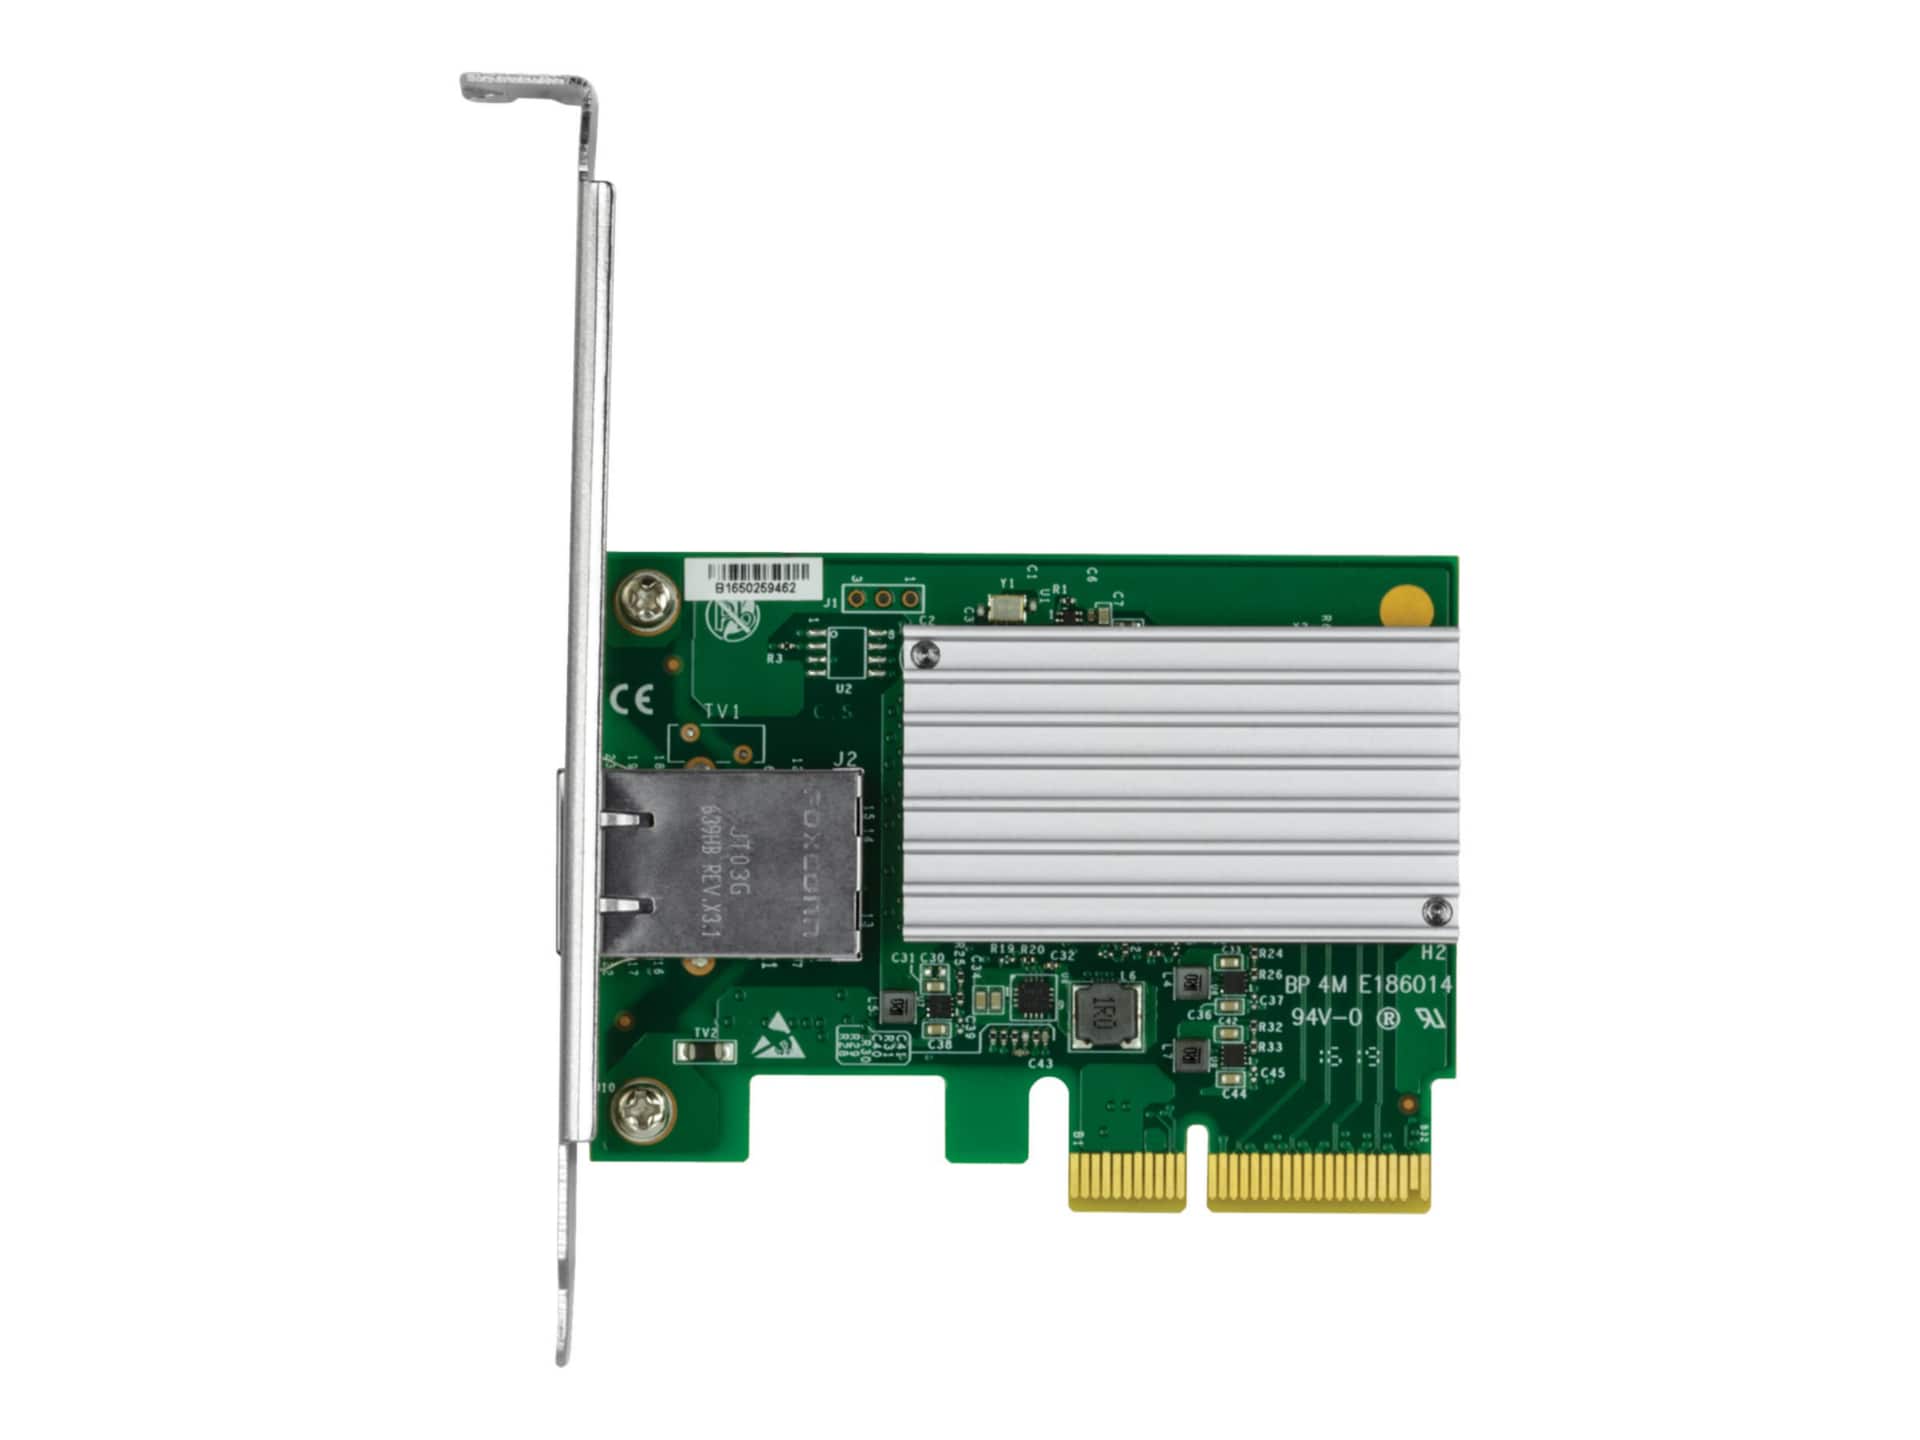 TRENDnet 10 Gigabit PCIe Network Adapter, Converts A PCIe Slot Into A 10G E